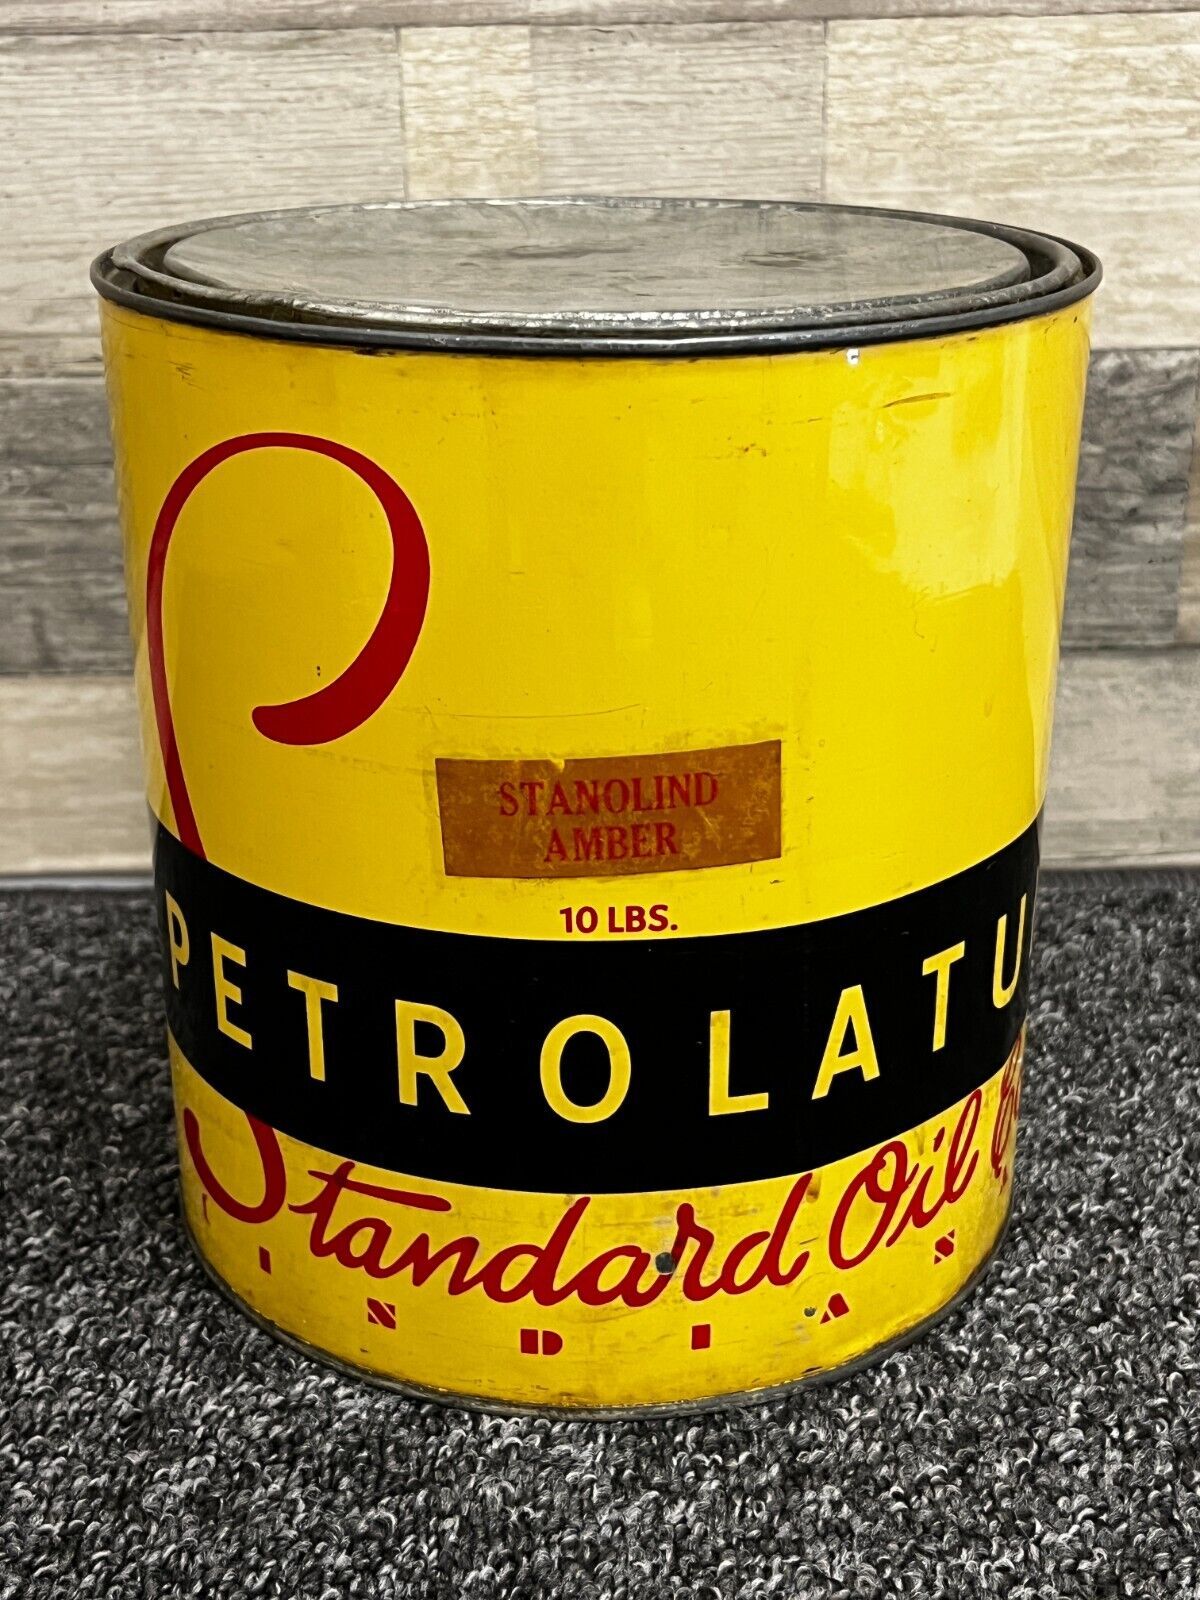 Standard Oil Co Indiana 10 LBS. Antique Stanolind Amber Petrolatum Grease Can -I - $174.14